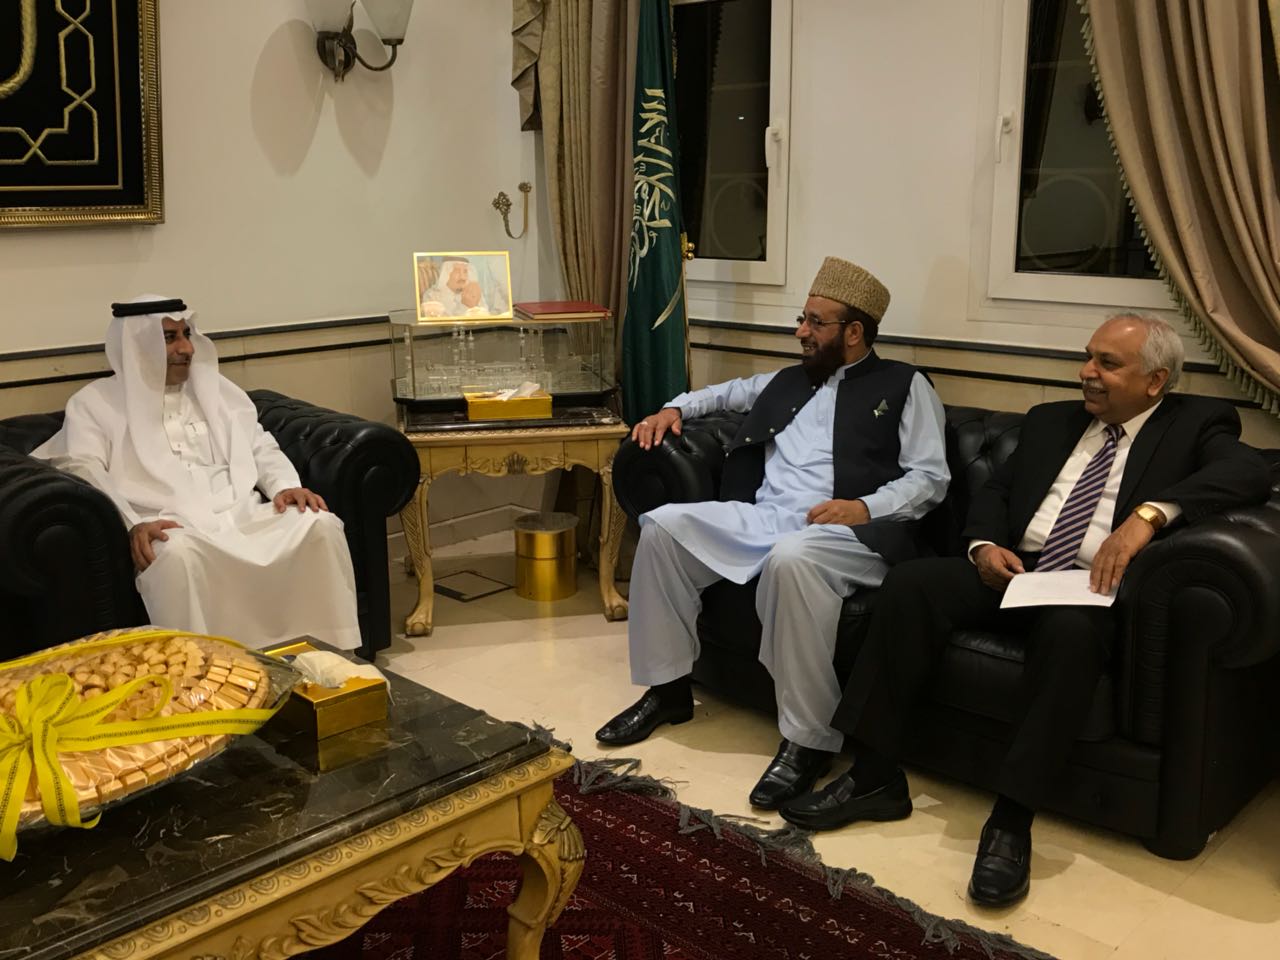 MINISTER, RELIGIOUS, AFFAIRS, AND, PEACE, KEEPING, AMONG, MINORITIES, SARDAR, YOUSAF, VISITED, MOSASSA, SOUTH ASIA, OFFICE, ALONG, WITH, DELEGATION